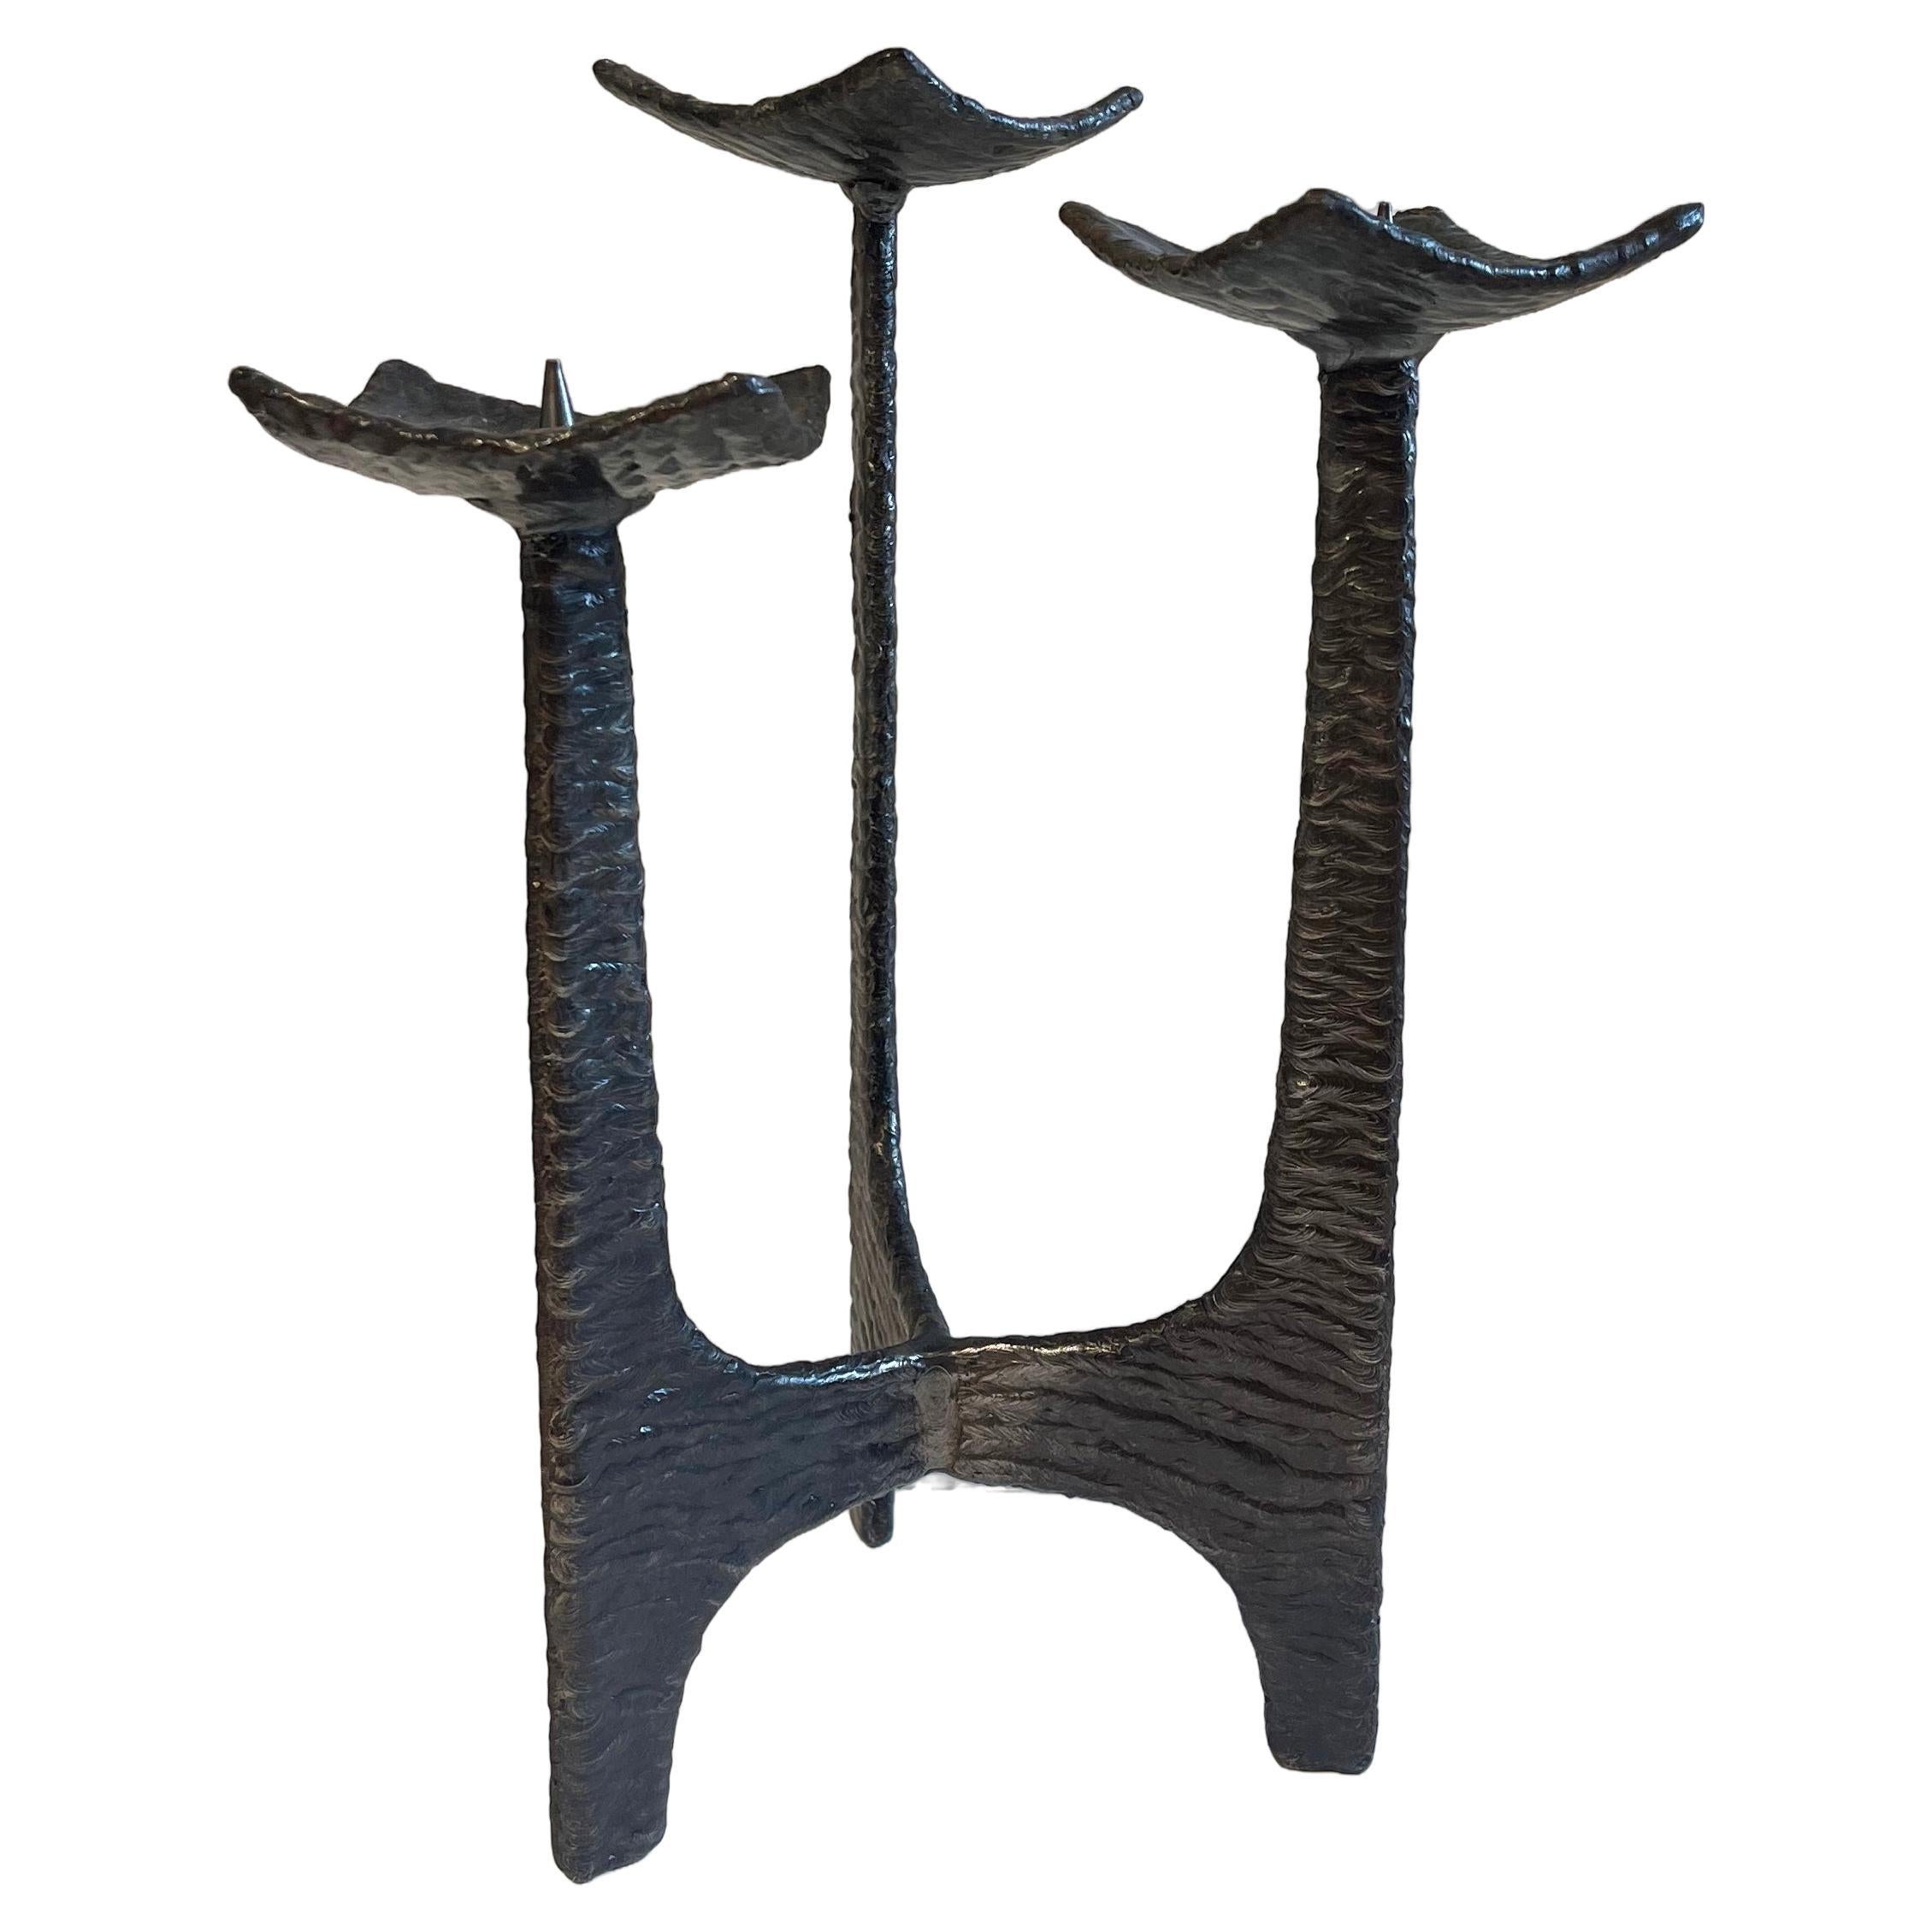 Chunky, with a brutalist touch, handcrafted heavy candelabra or candle holder, 3-lighted.
All hand made, brutalist design look a part with a hint of Pouchain style!
3 wings attached to each other in textured charcoal grey give a modern, timeless